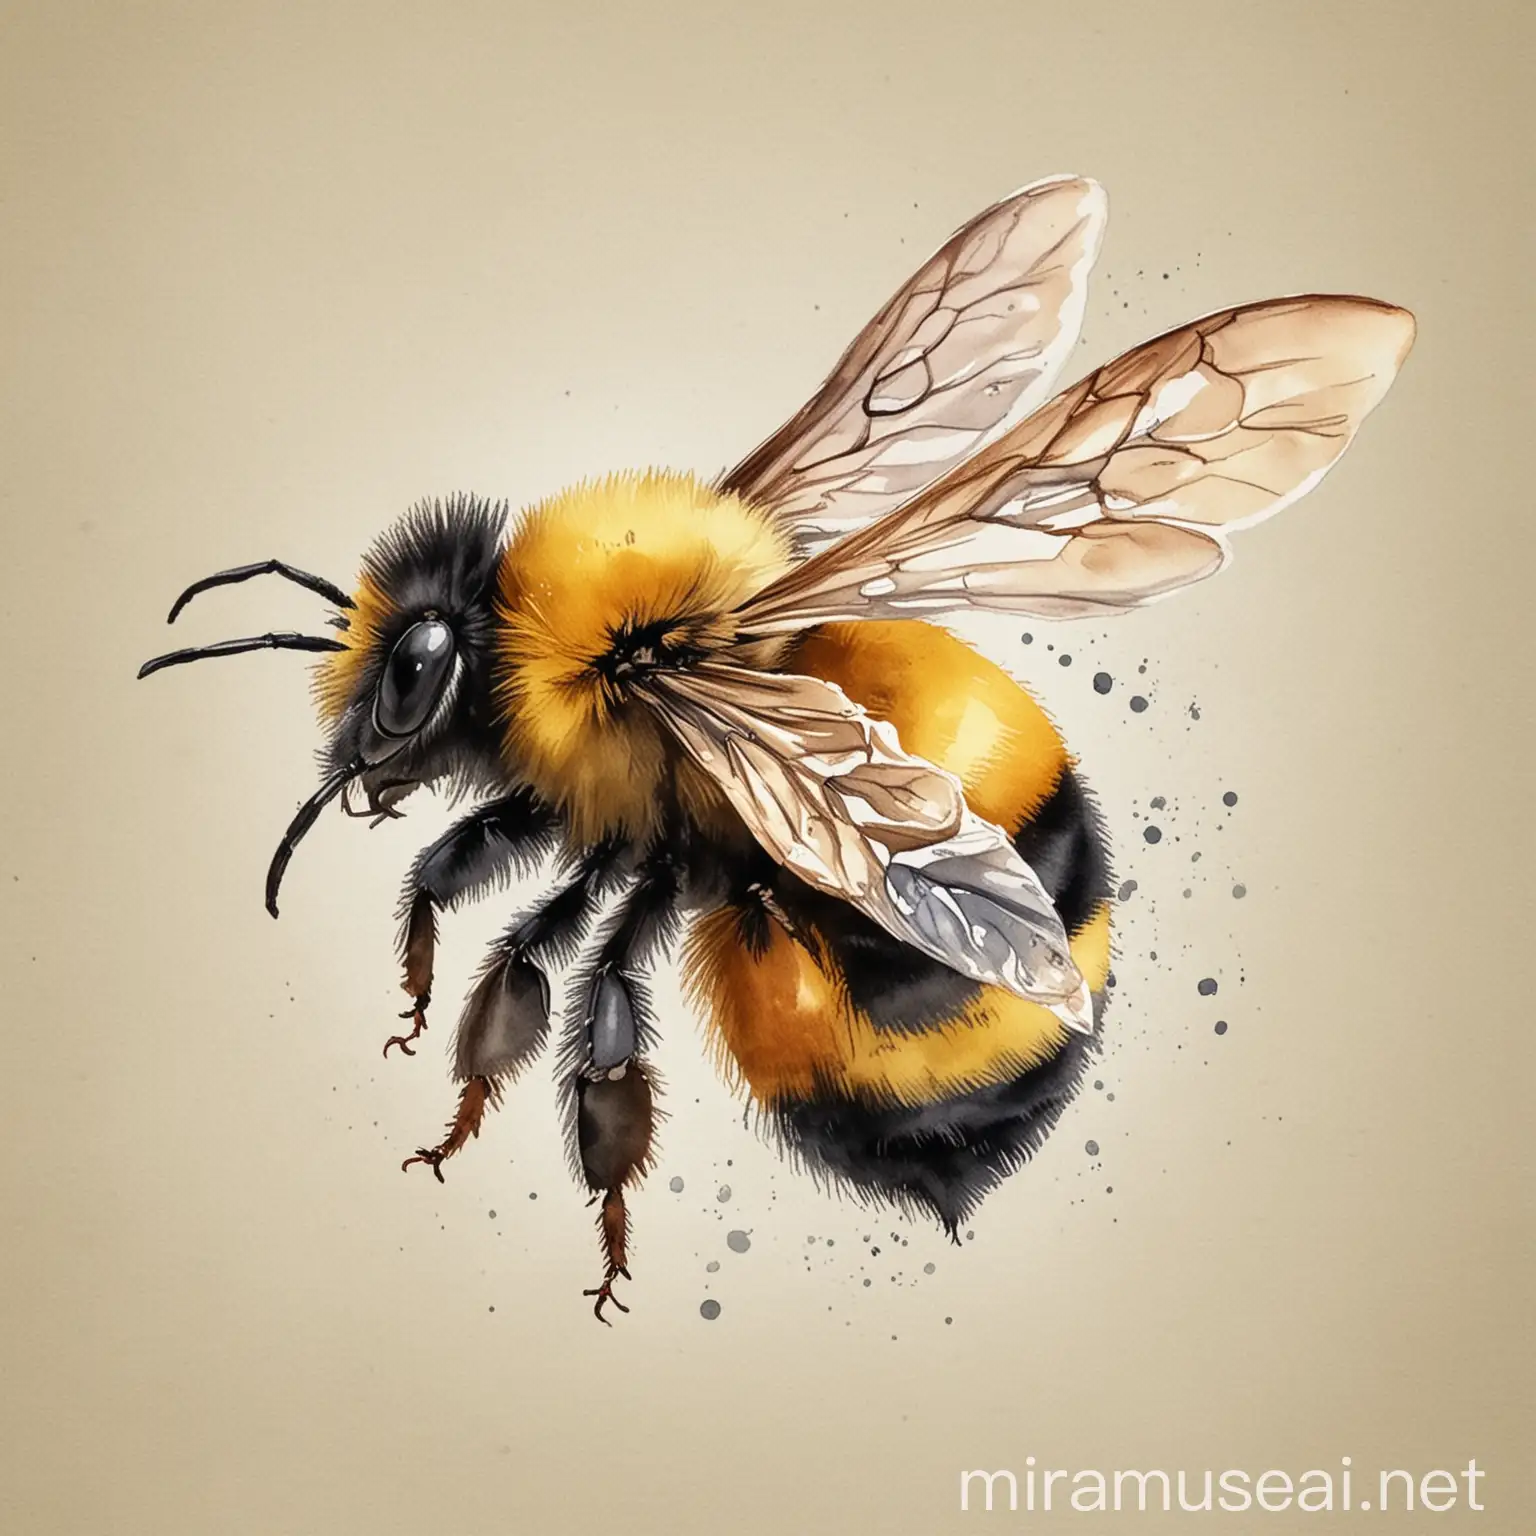 Bumble bee water colour illustration.